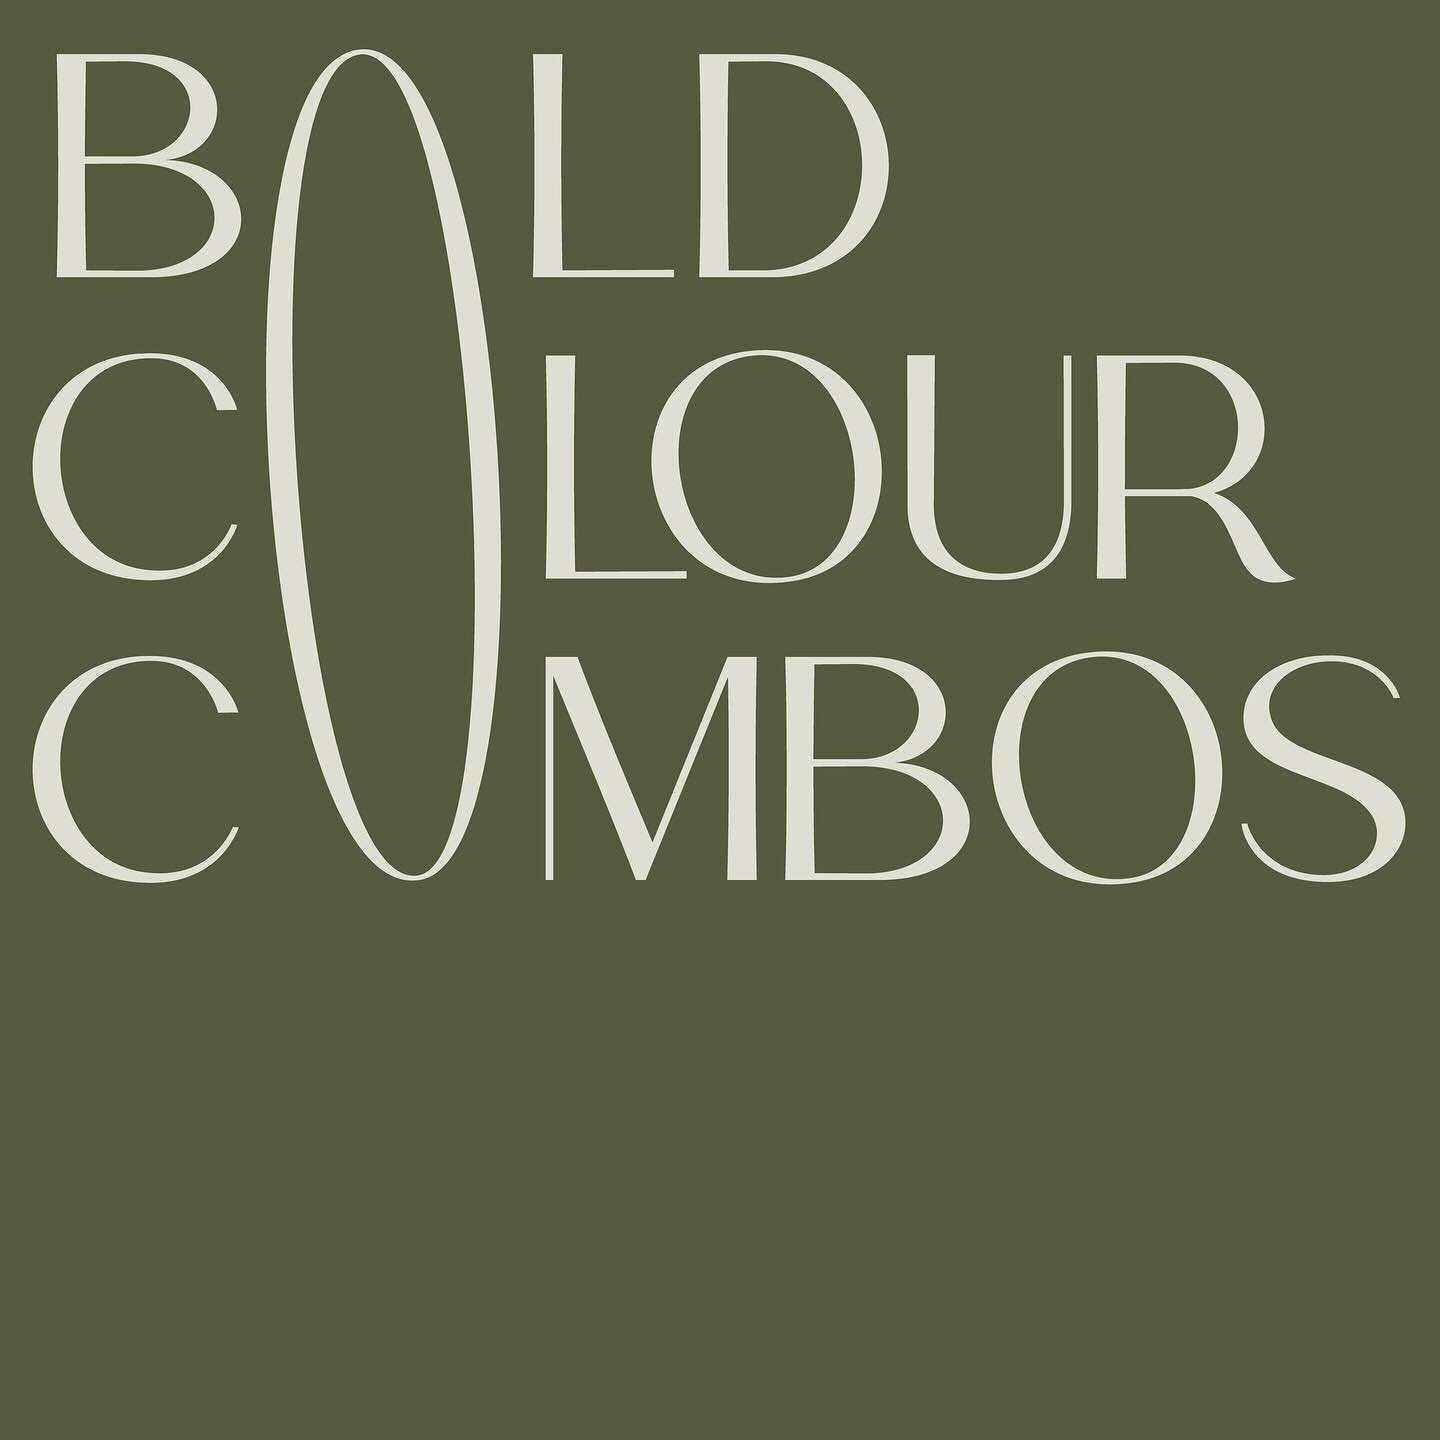 BOLD COLOUR COMBOS &mdash;

In need of some good colour combos? Save this post next time you have a fun project 😉

Hot tip: Go check out
https://pigment.shapefactory.co 

#colourcombo #designer #colour #graphicdesigner #art #studiobaroquee